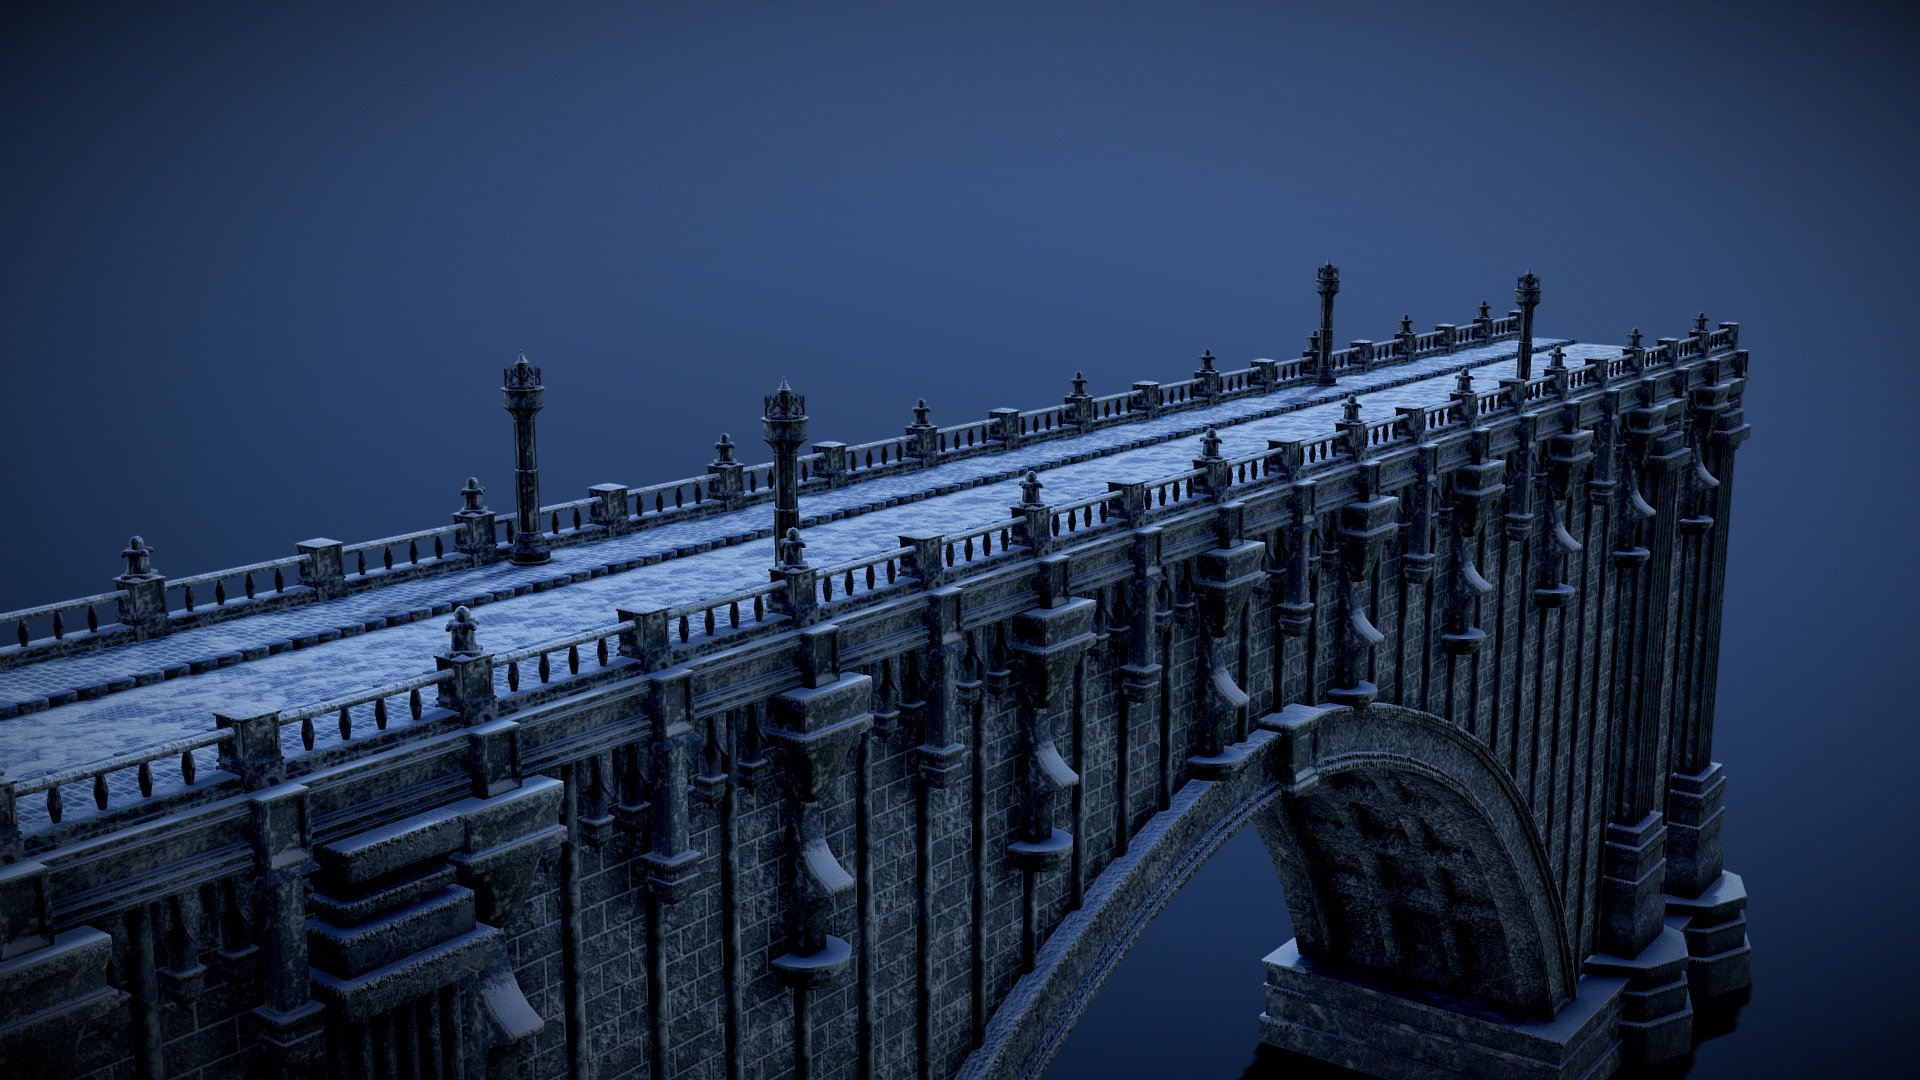 A snowy bridge.  Tribute to a fantastic game.

Modeled in Blender and textured in Substance Painter 2017 3d model